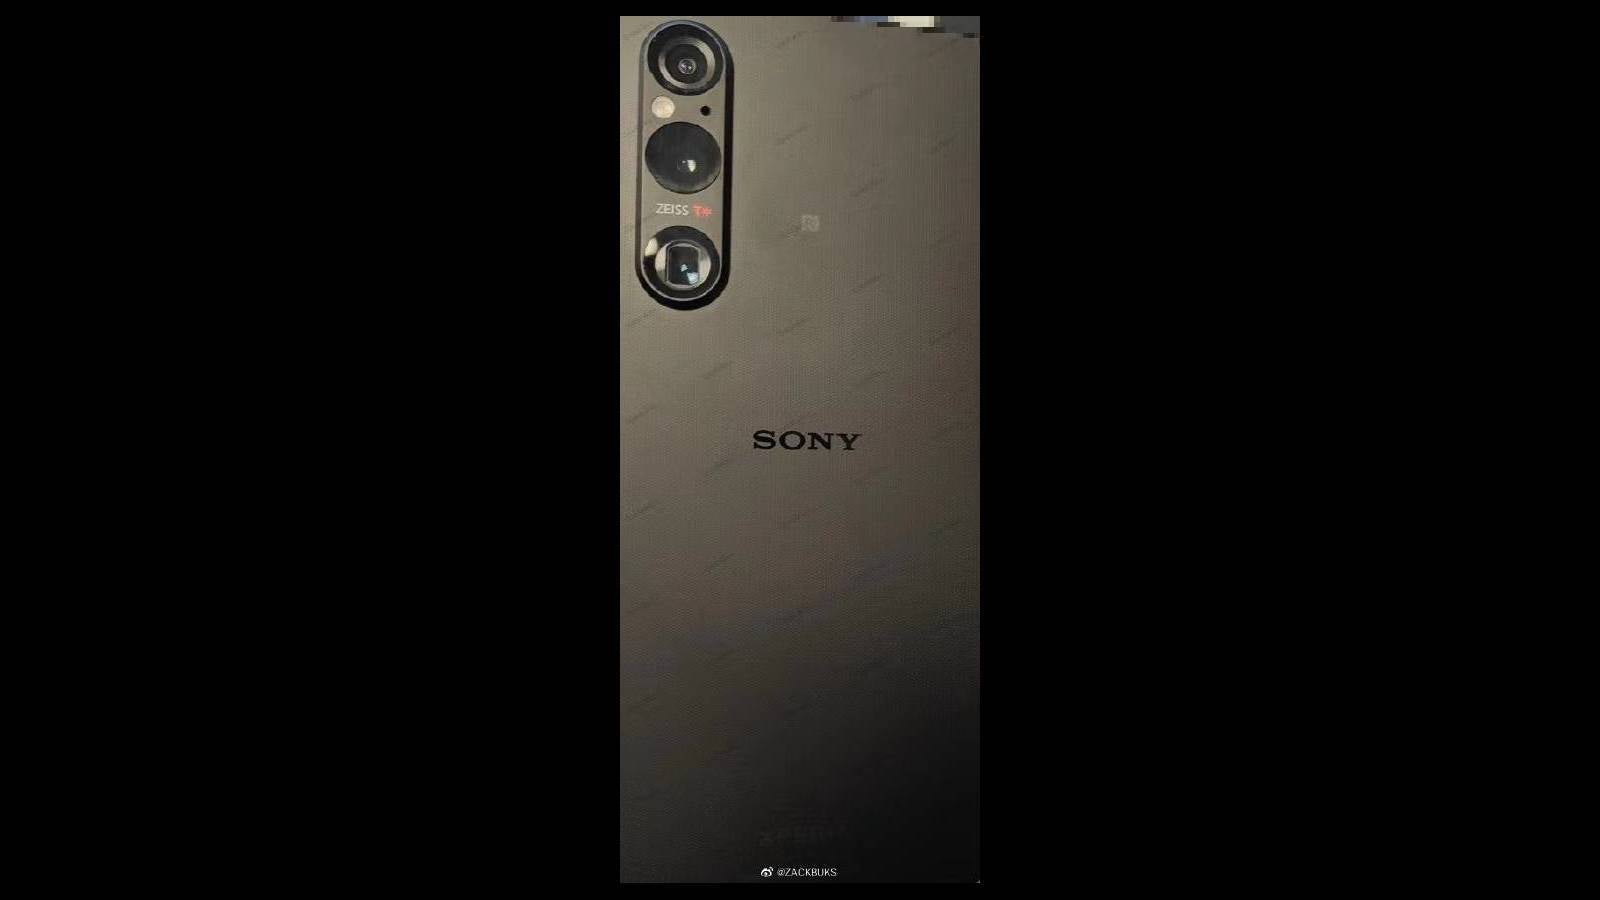 Leaked Sony Xperia 1 V image - First alleged Sony Xperia 1 V image shows a revamped camera array